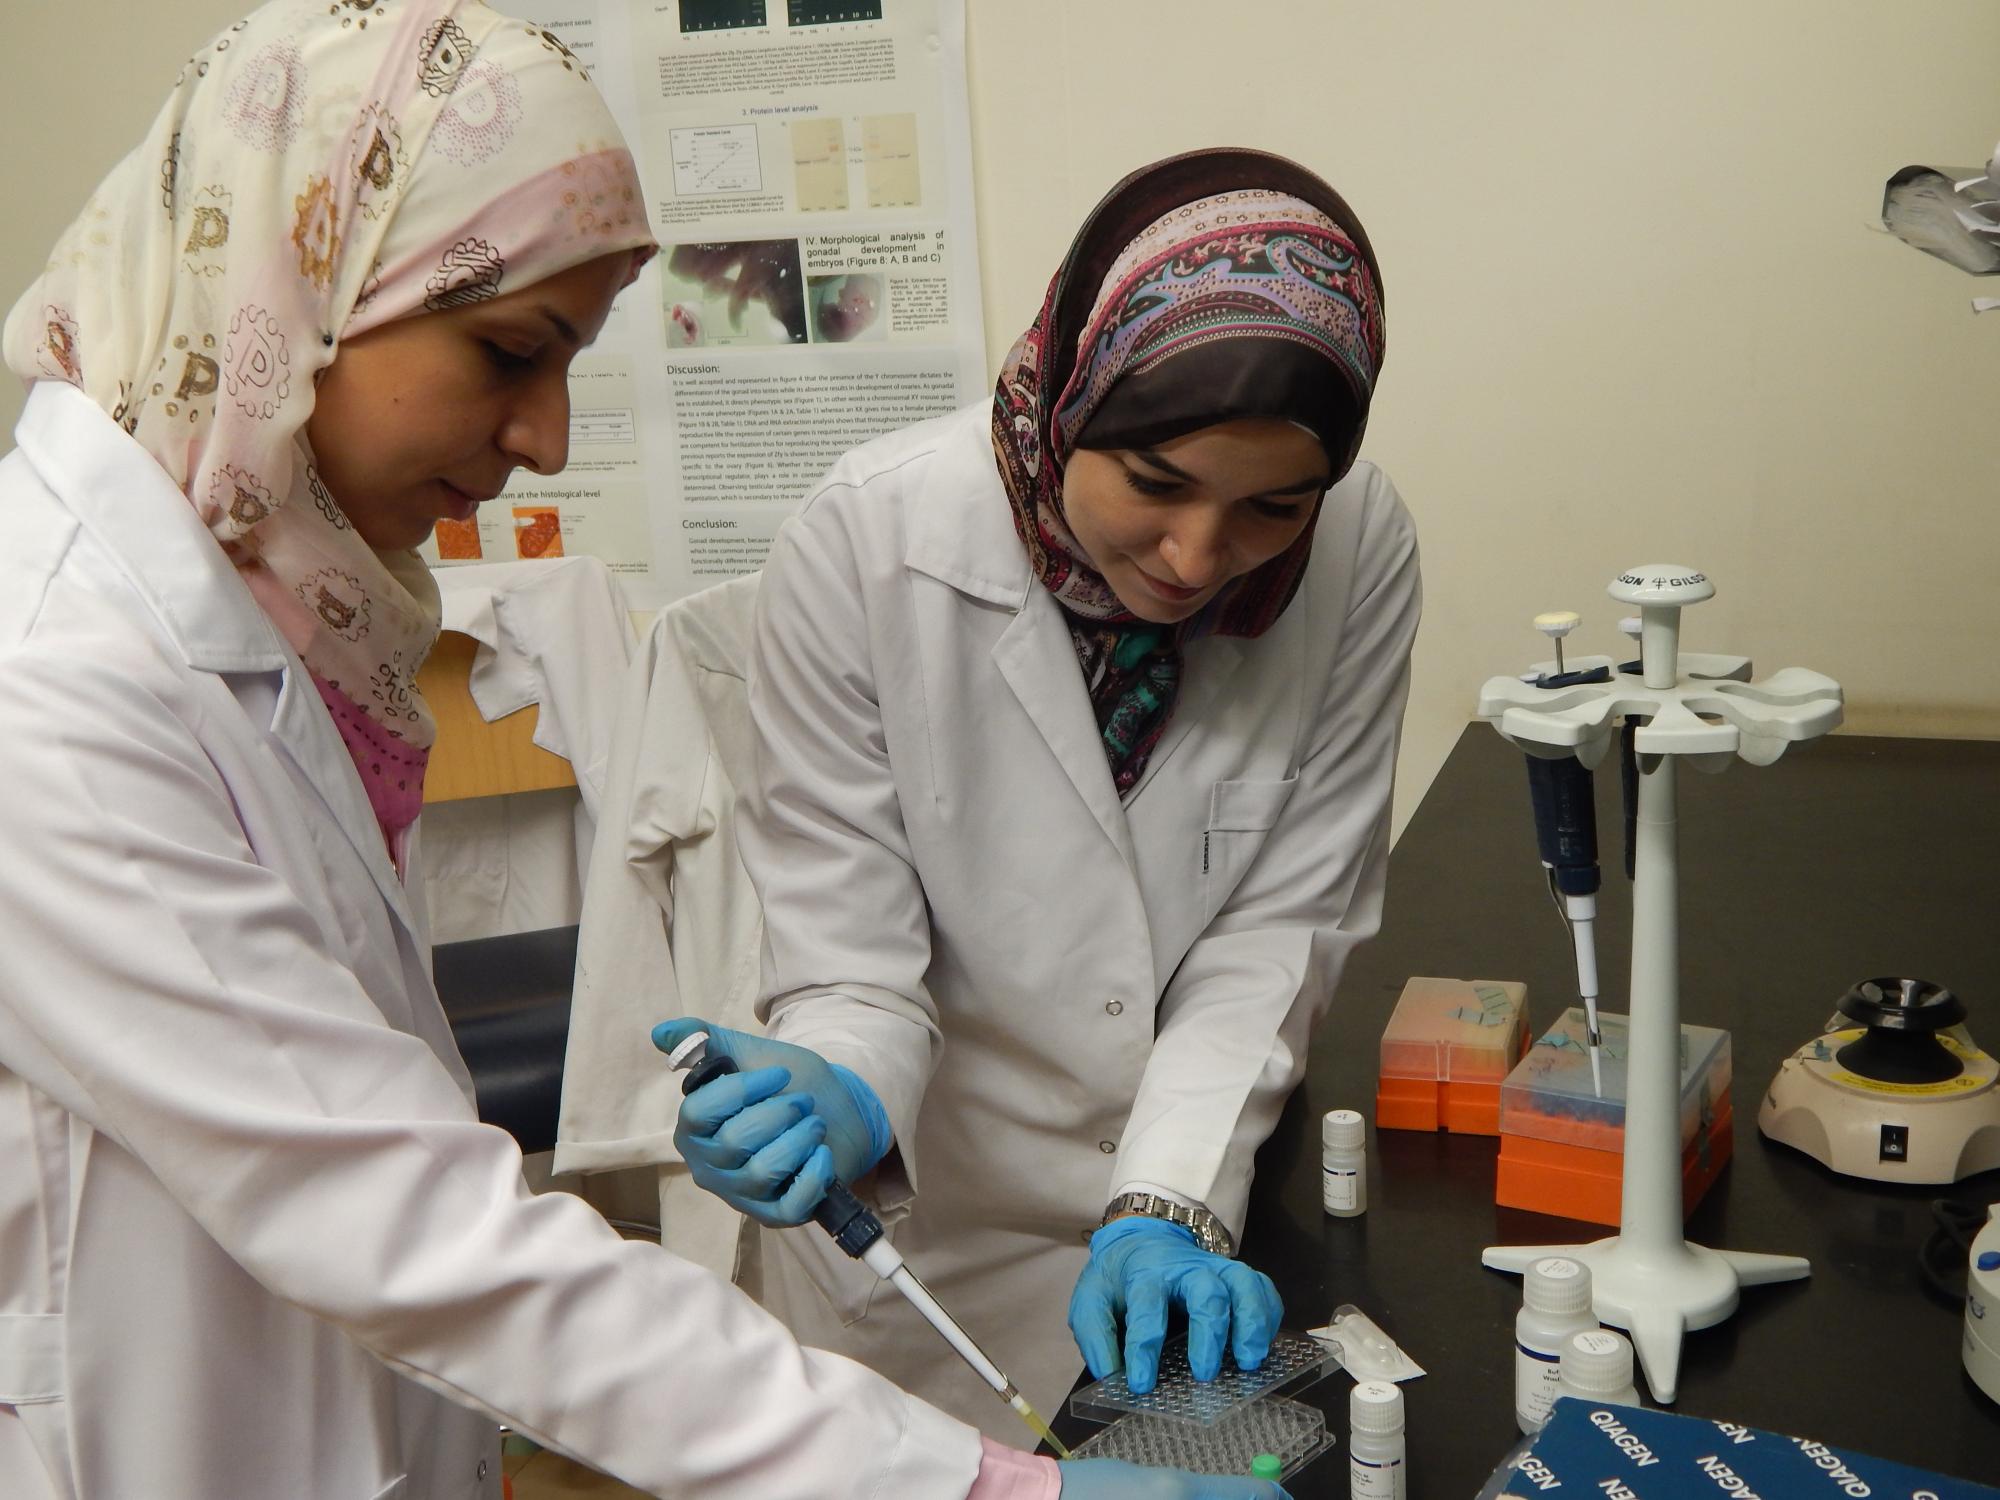 Students Laila Ziko and Nancy El-Baz work together on innovative research aimed at improving breast cancer treatments